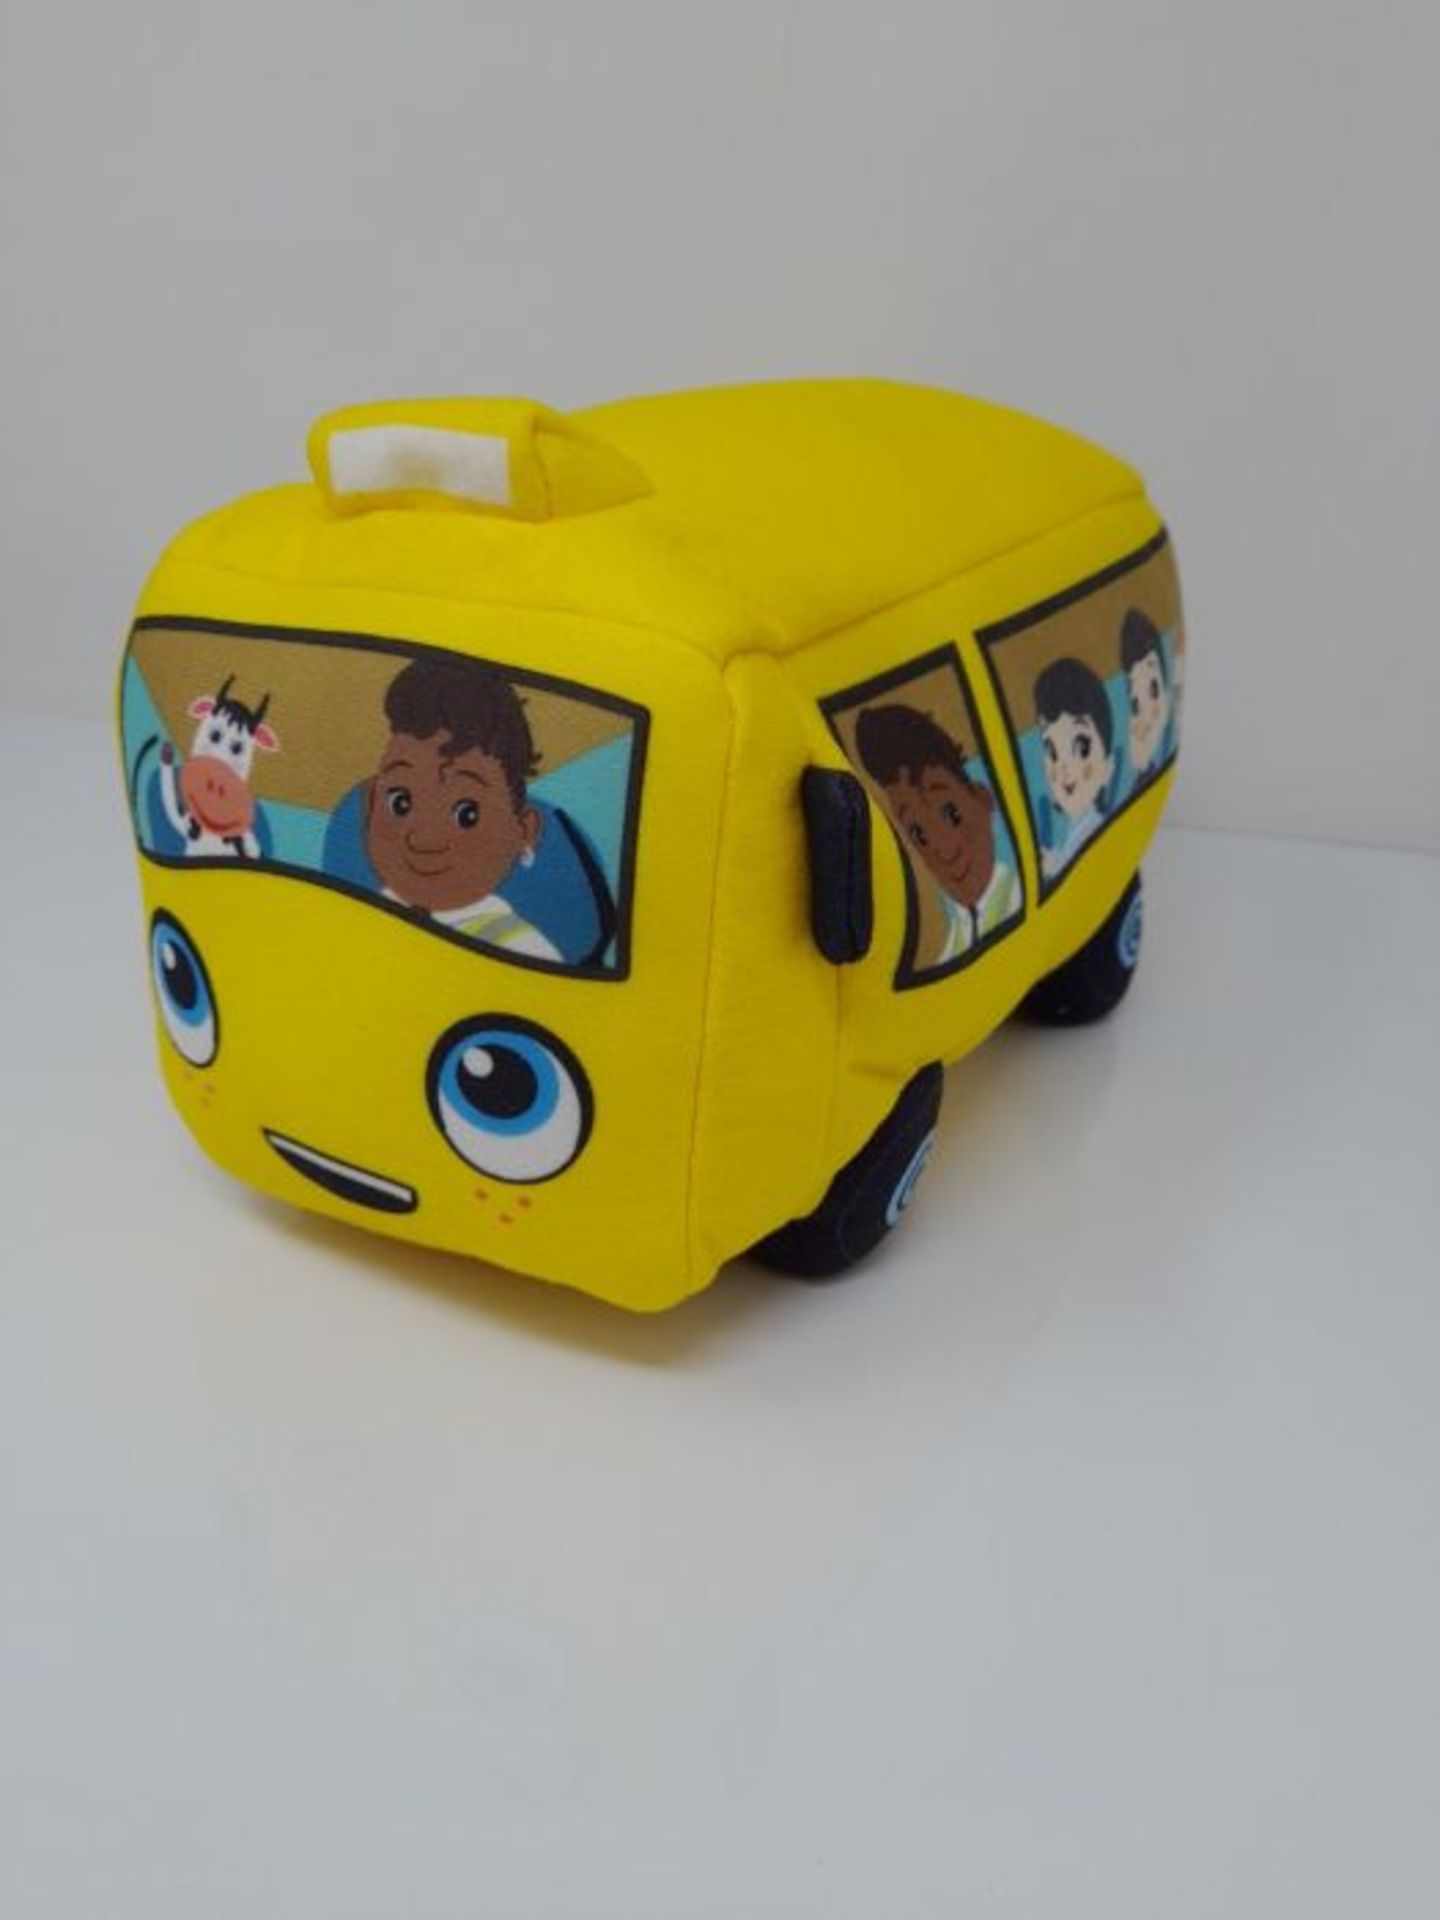 Little Baby Bum Little Tikes Wiggling Wheels on the Bus - Play & Learn - Interactive - - Image 3 of 3